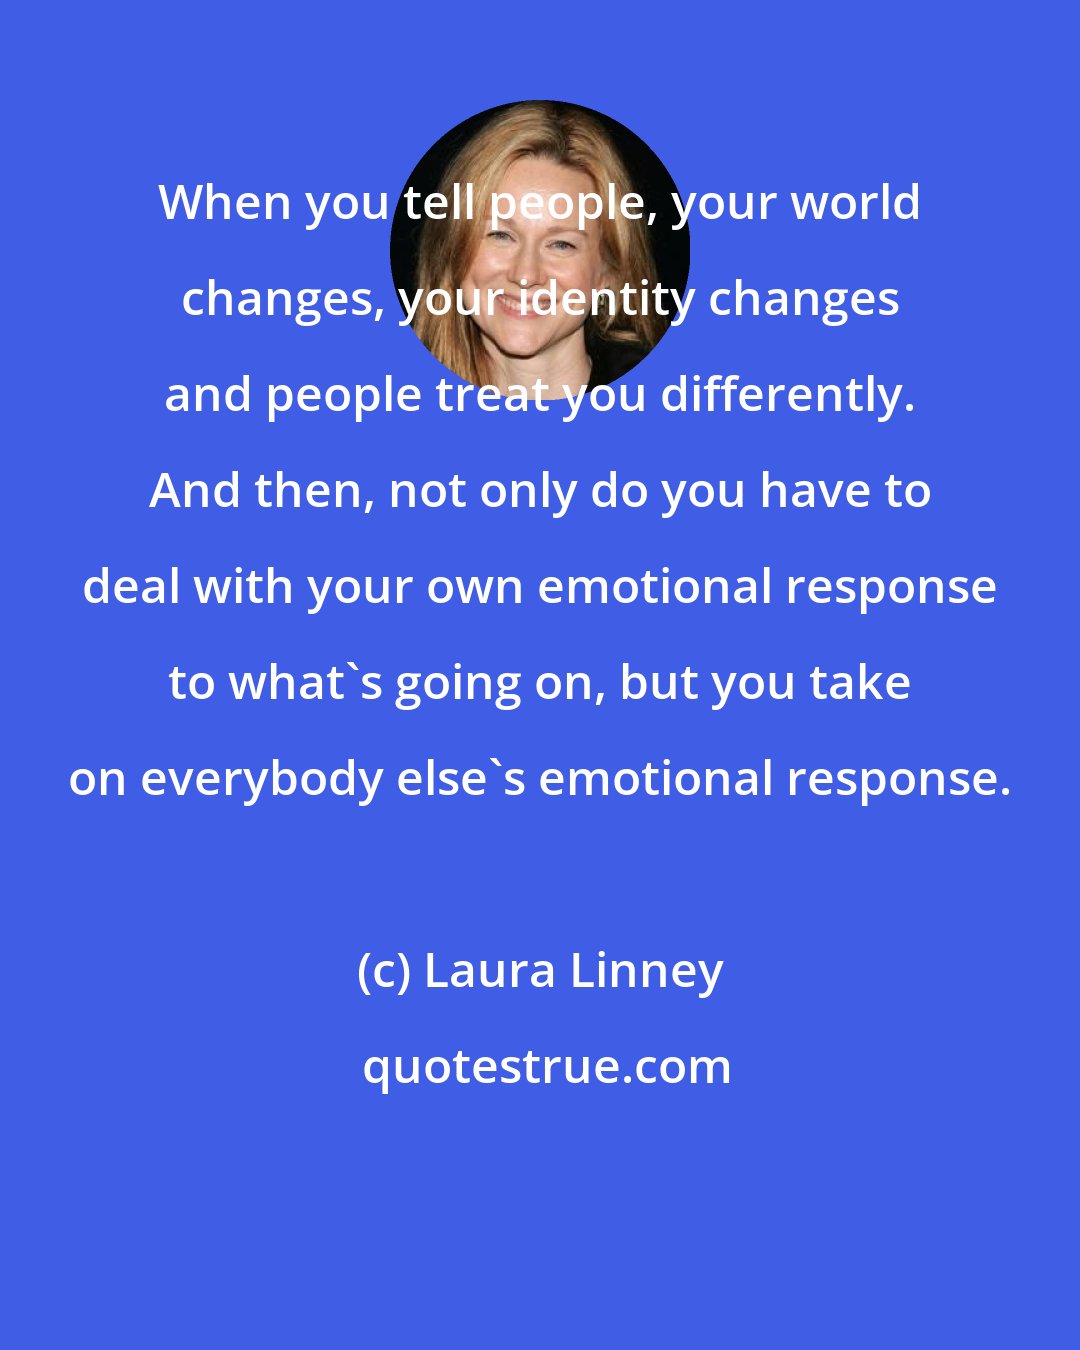 Laura Linney: When you tell people, your world changes, your identity changes and people treat you differently. And then, not only do you have to deal with your own emotional response to what's going on, but you take on everybody else's emotional response.